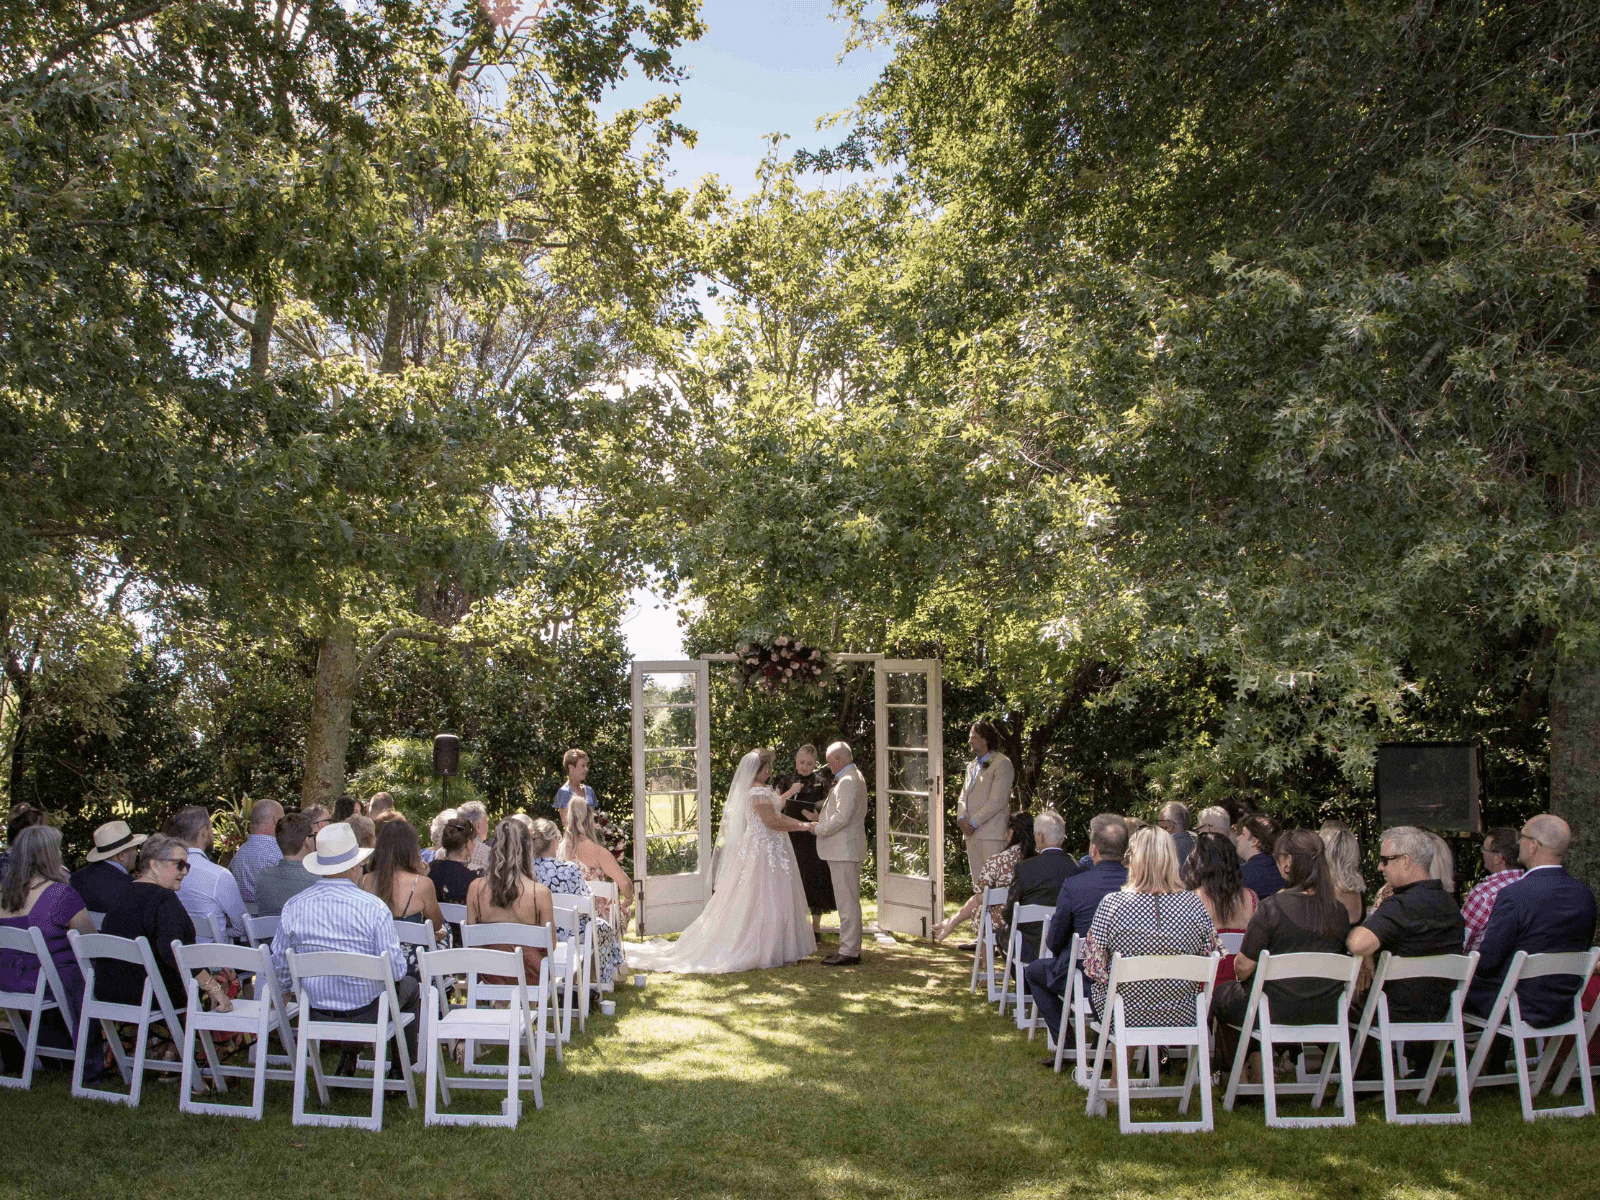 Beautiful sunny garden wedding setting with the bridge and groom at the alter.